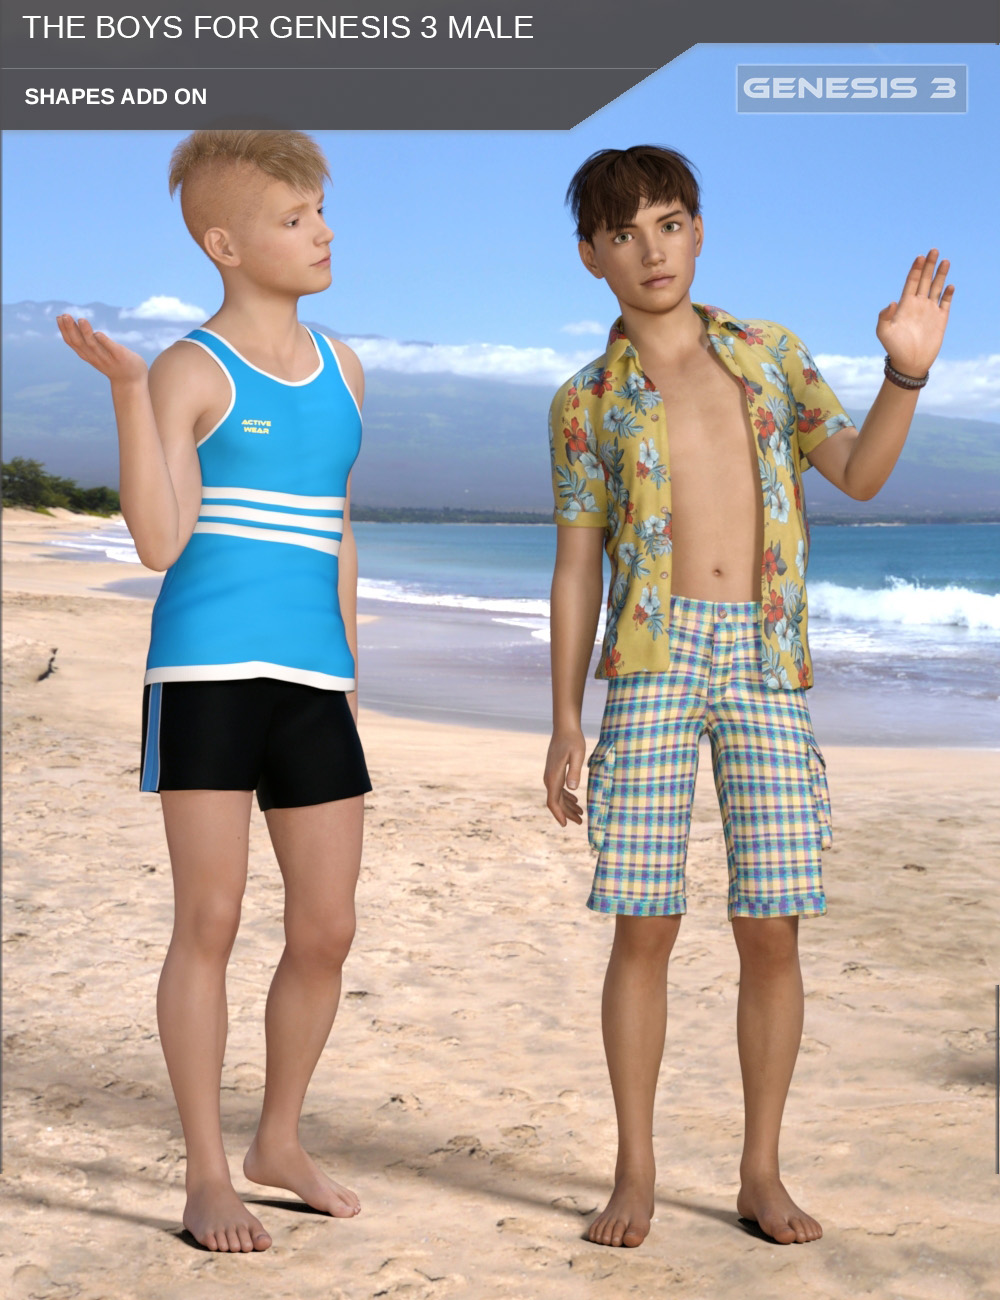 the boys shapes for genesis 3 male daz3d下载站